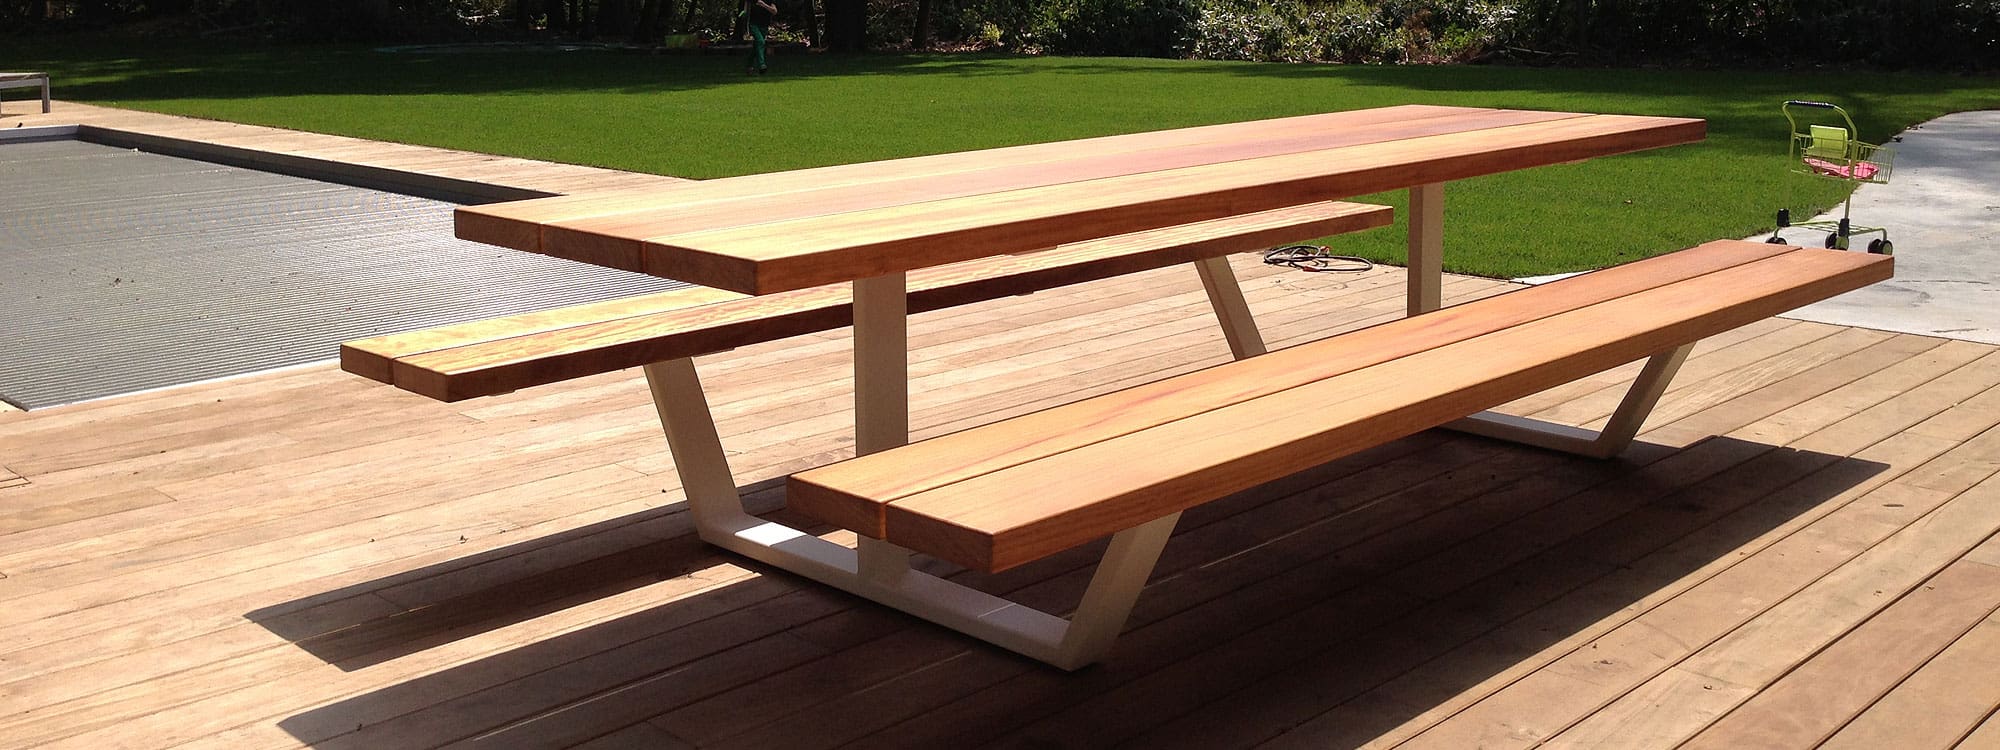 Image of Cassecroute minimalist picnic table and benches with white frame and iroko hardwood surfaces, shown on wooden decking next to swimming pool